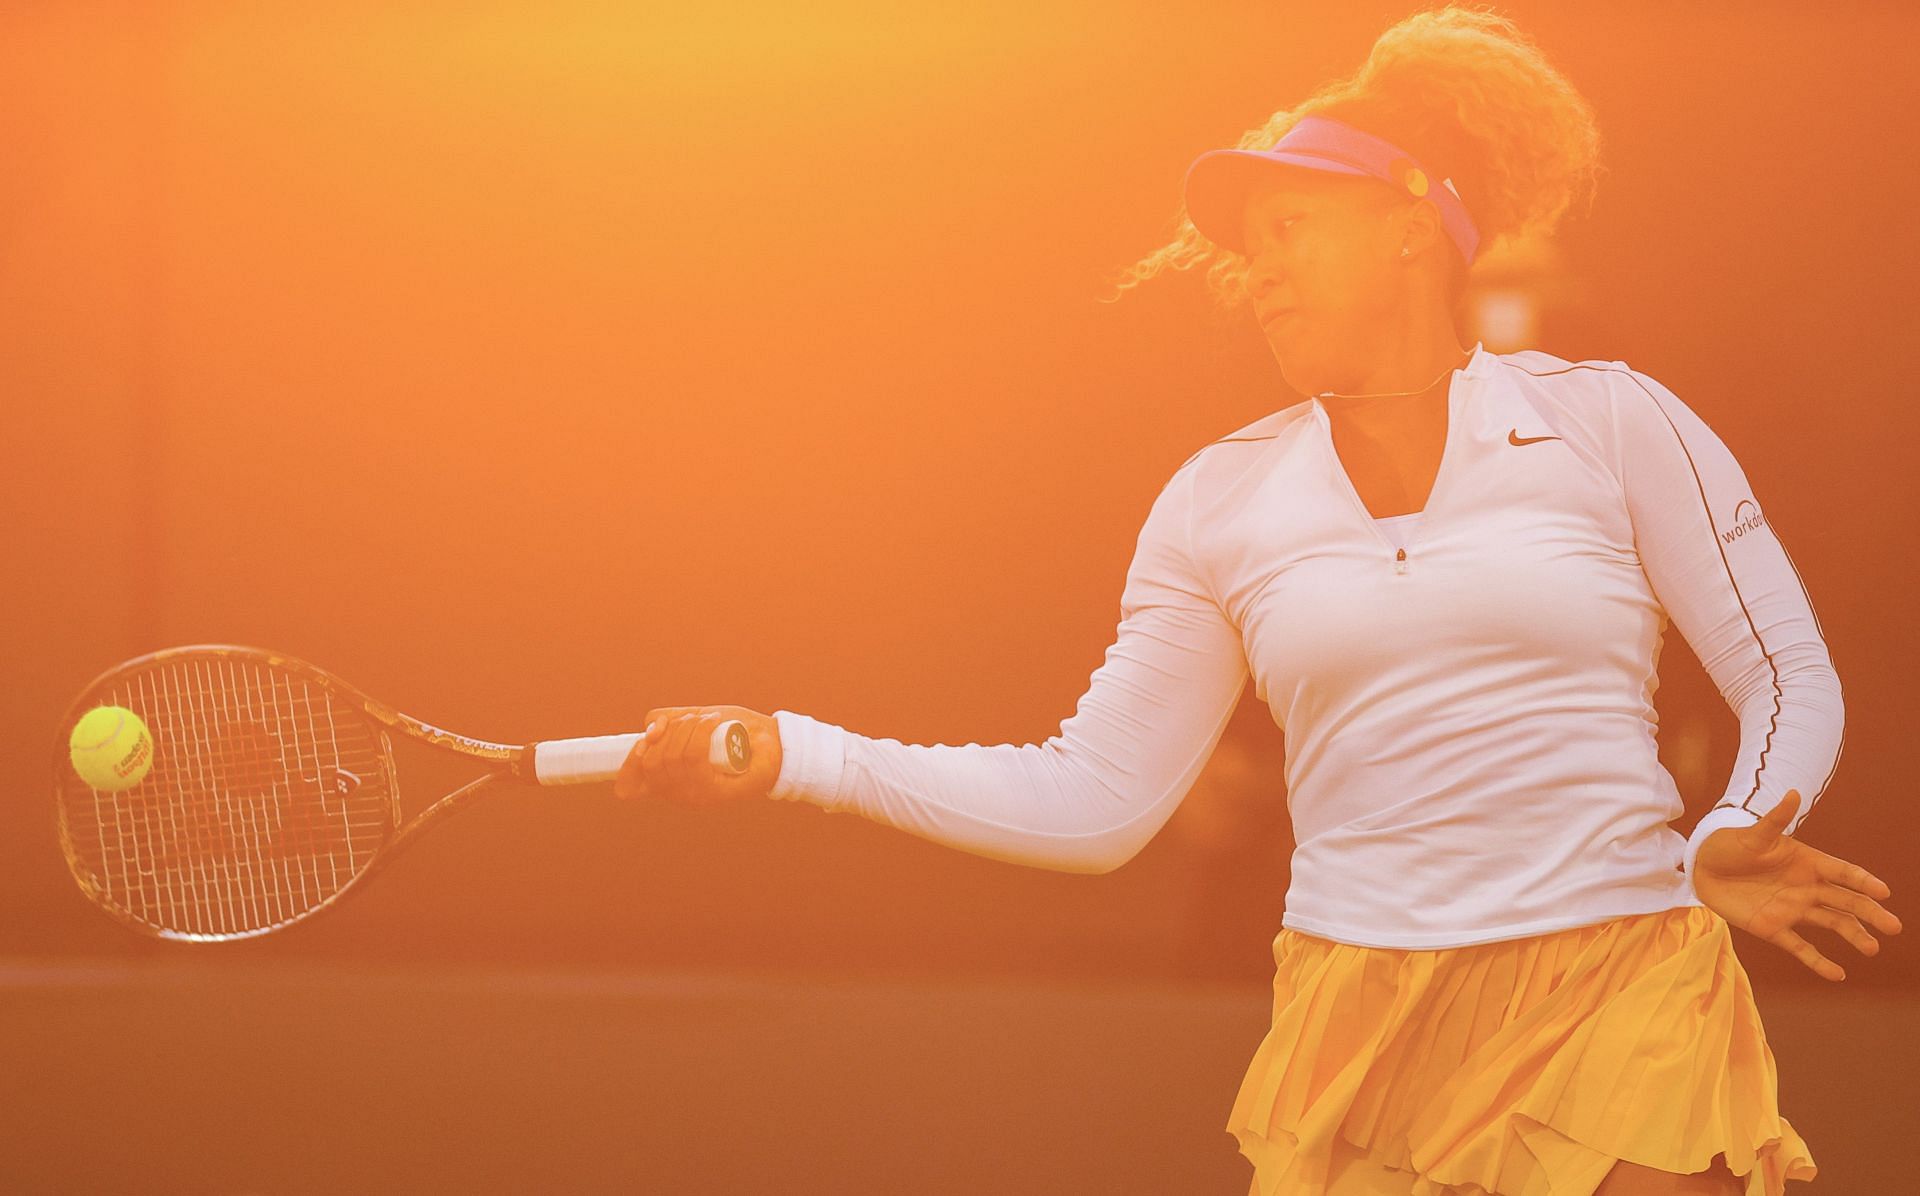 Naomi Osaka knows how damaging sun exposure could be as a tennis player.